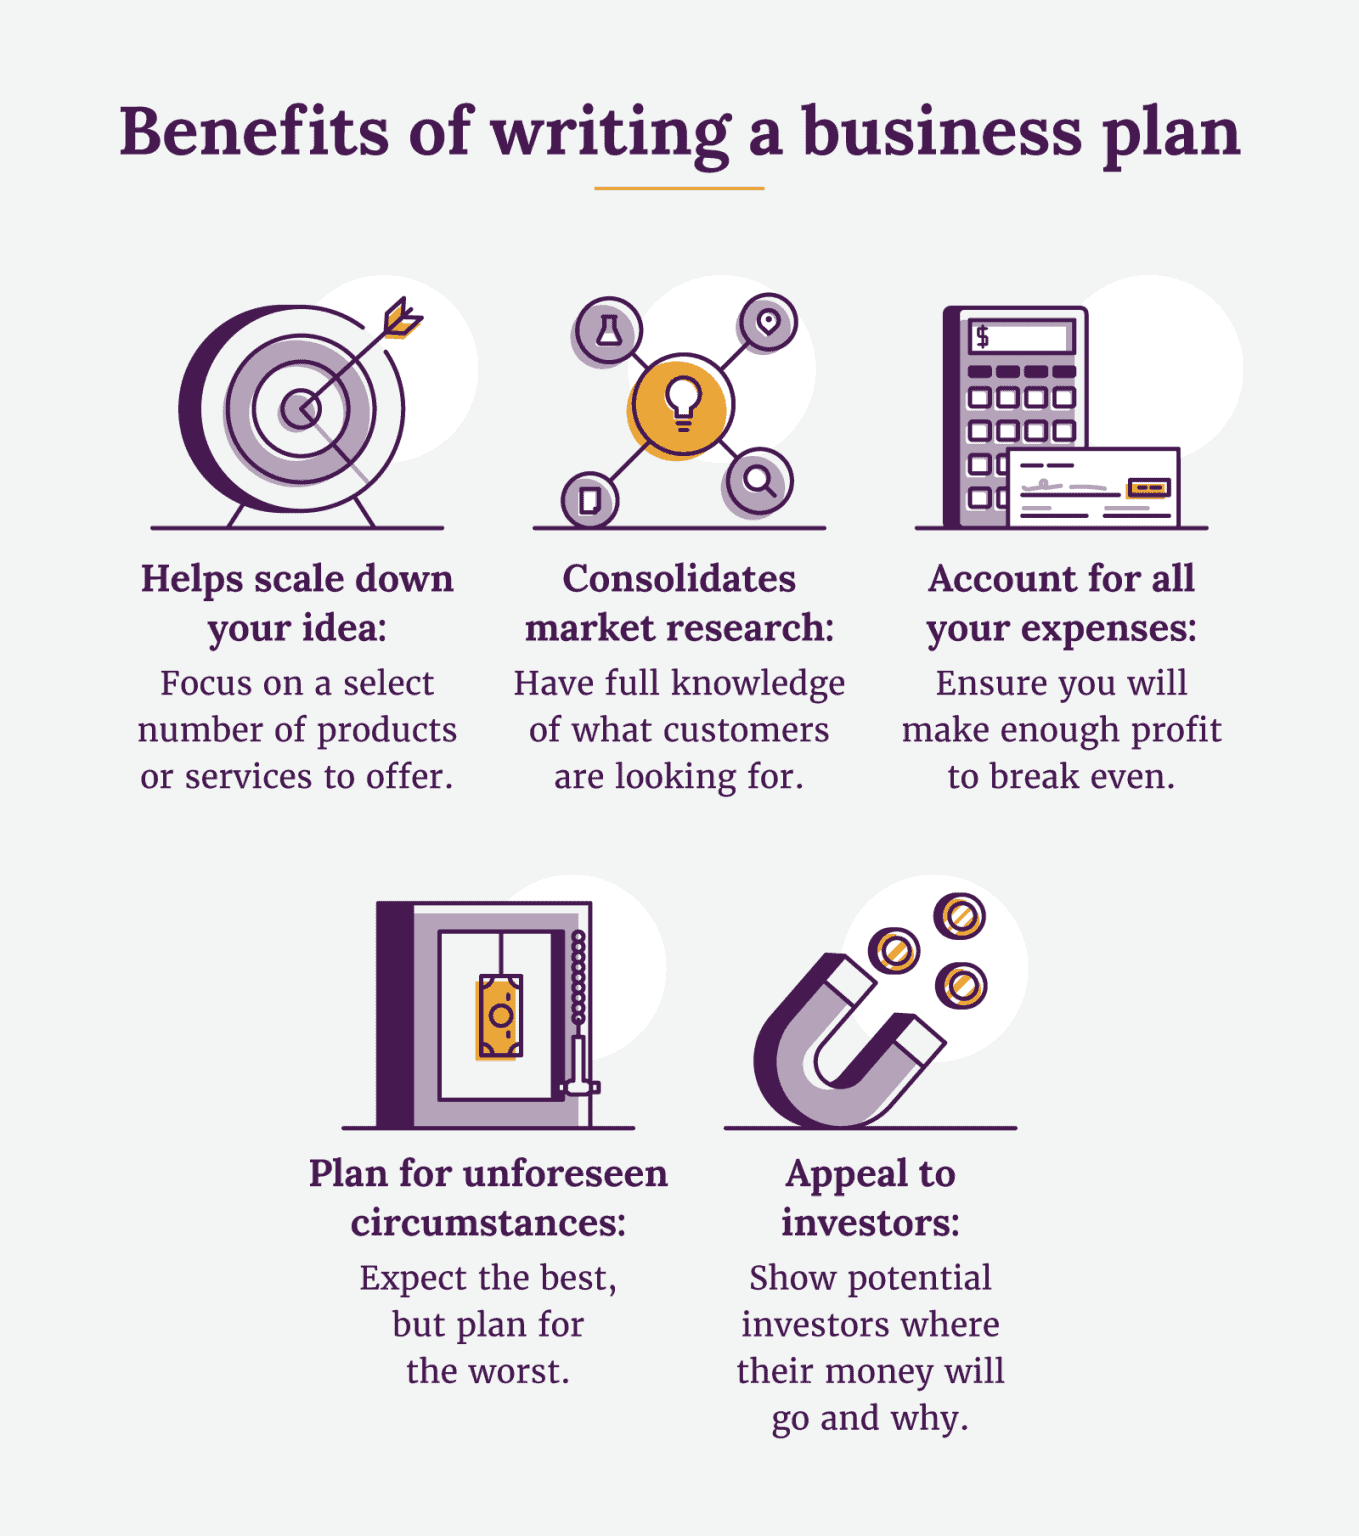 describe the benefits of the business plan